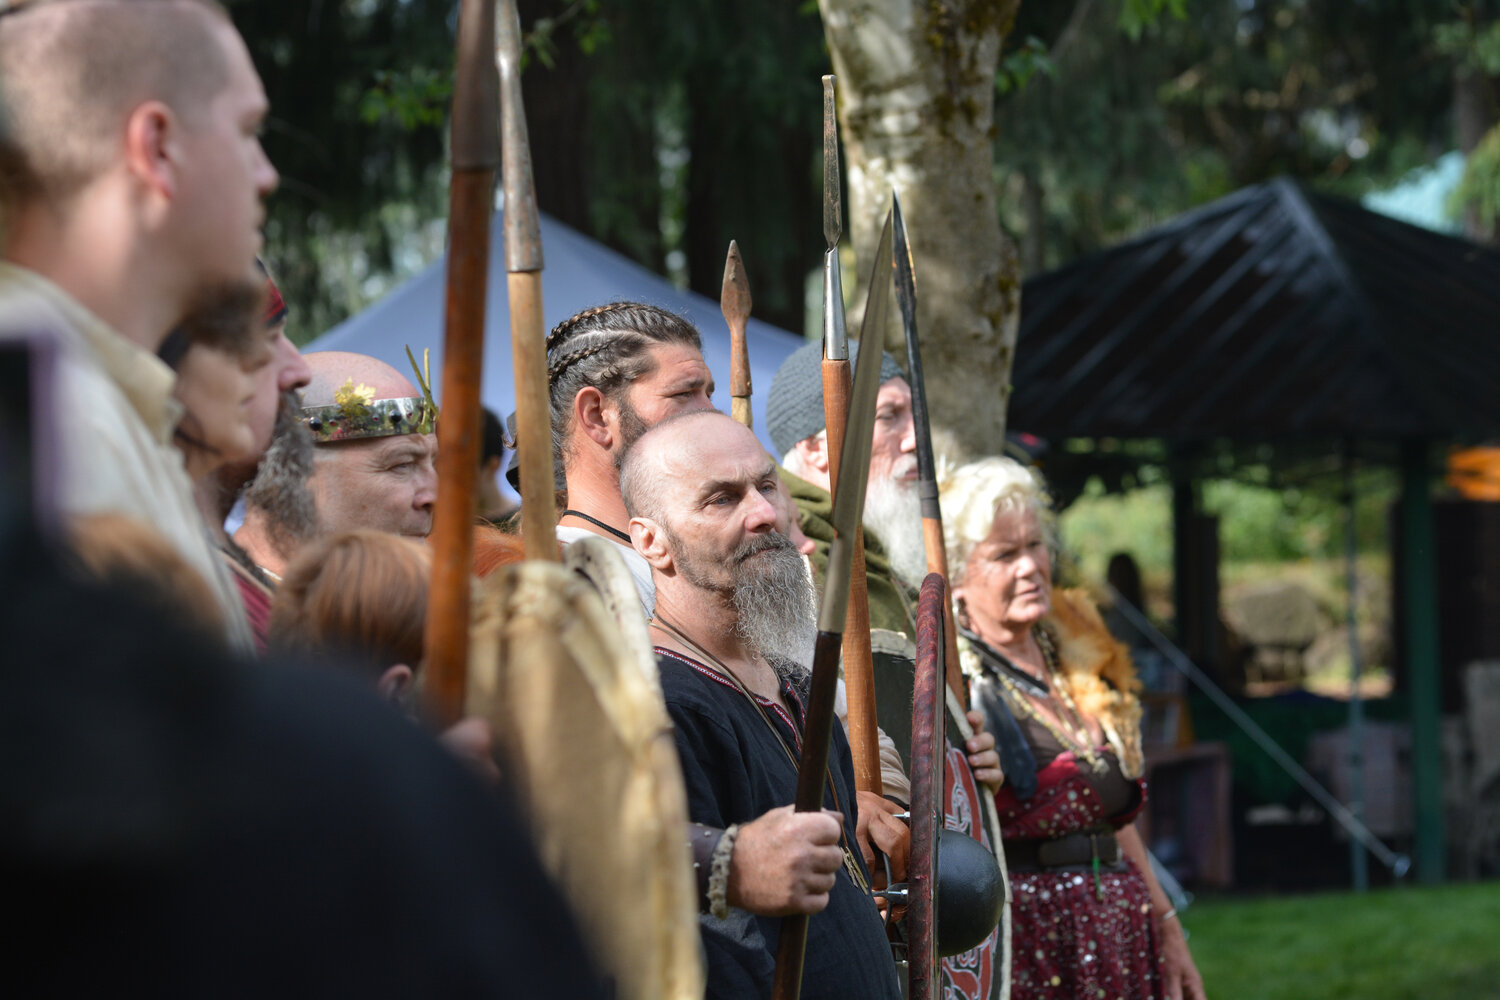 Vikings stand guard at Cochrane Park on Sept. 10 during a ritual and ceremony to honor the Norse Goddess Freyja.